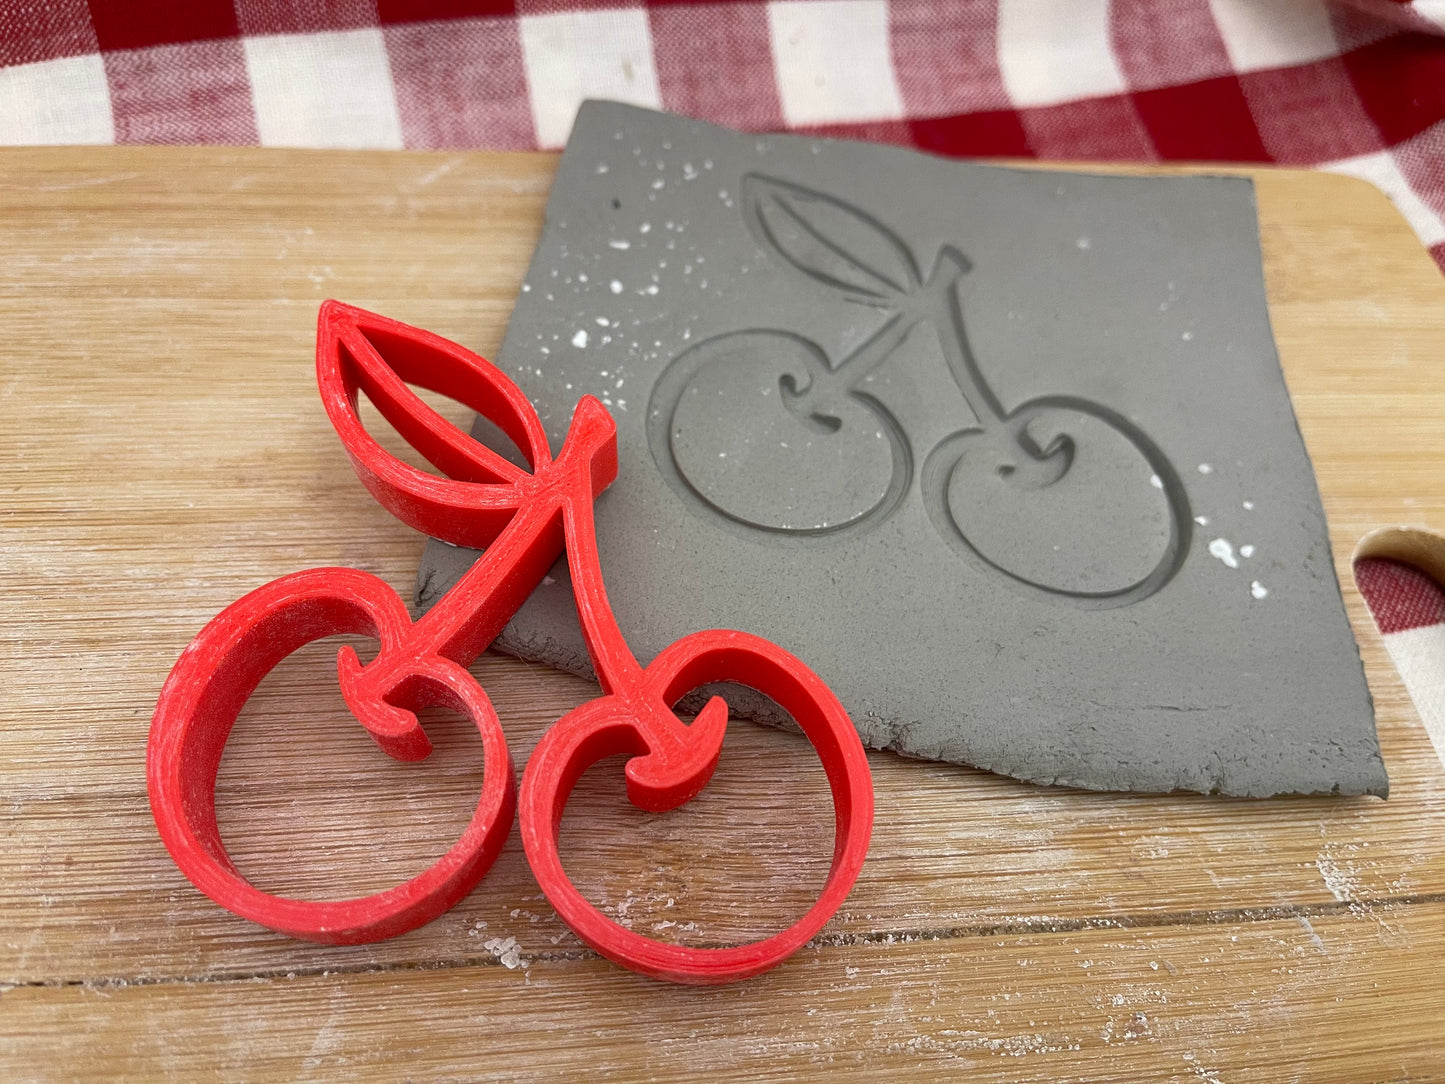 Cherry Pottery Stamp - plastic 3D printed, multiple sizes